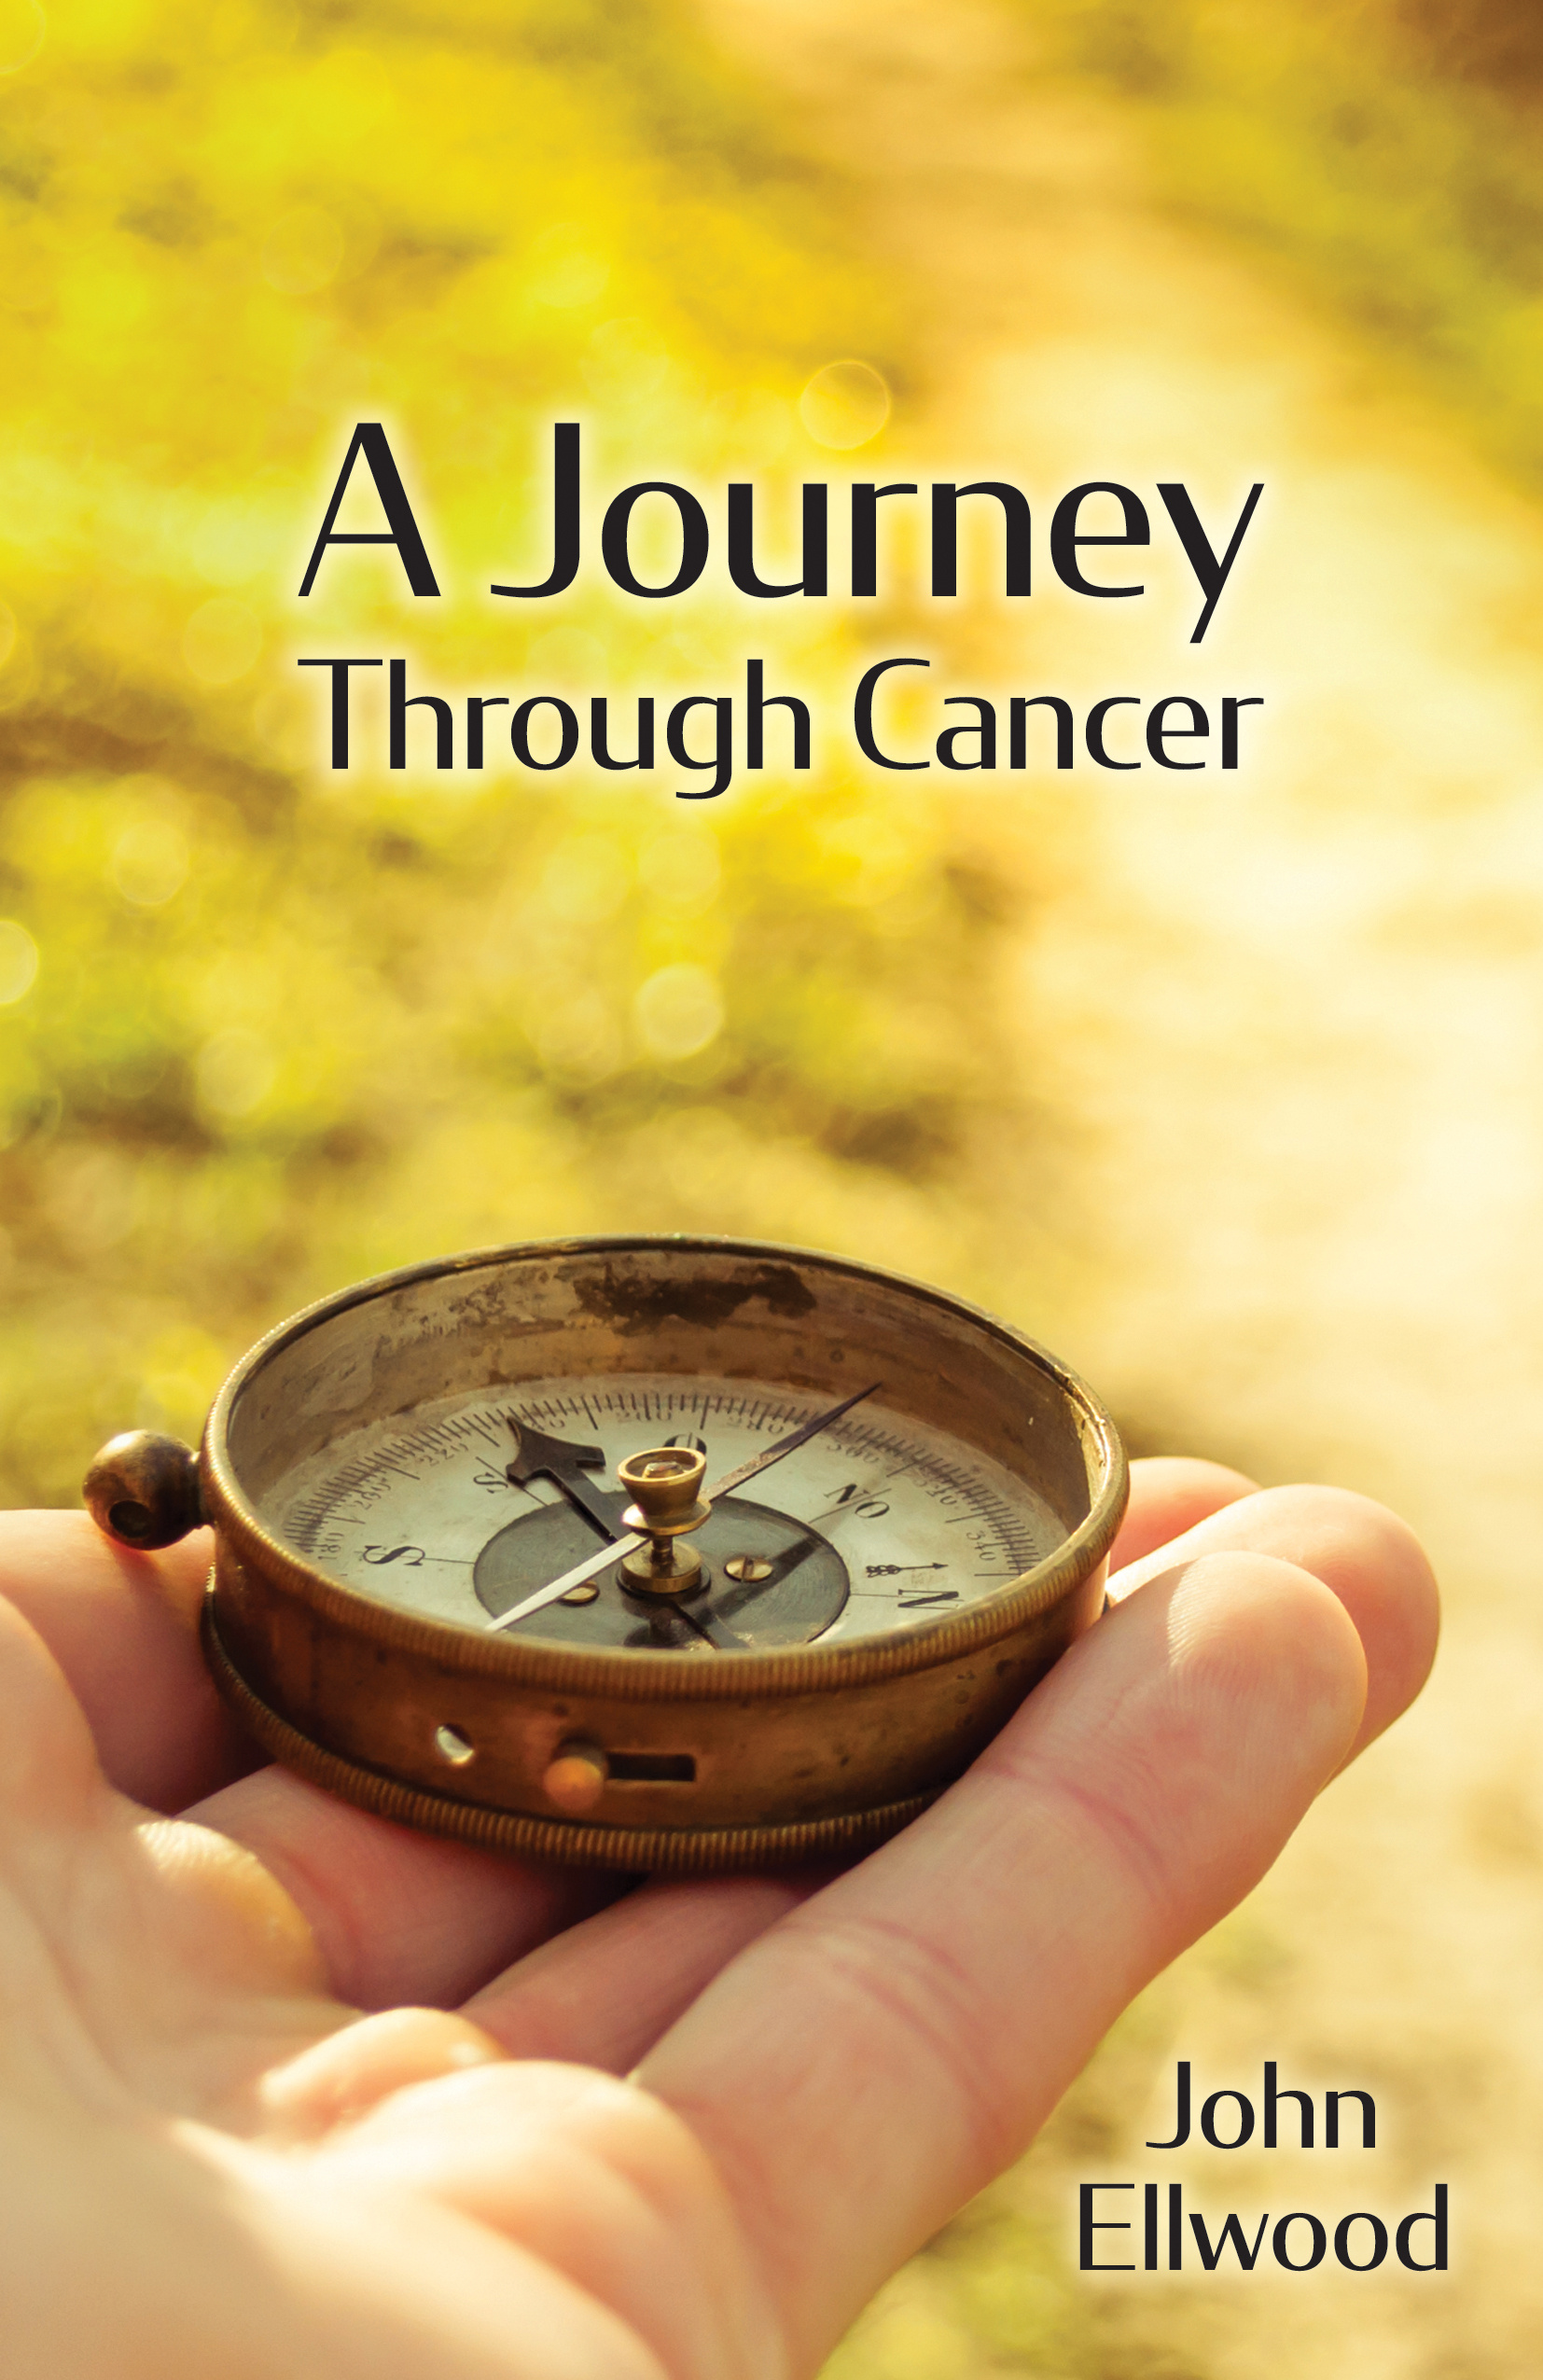 biography of cancer book